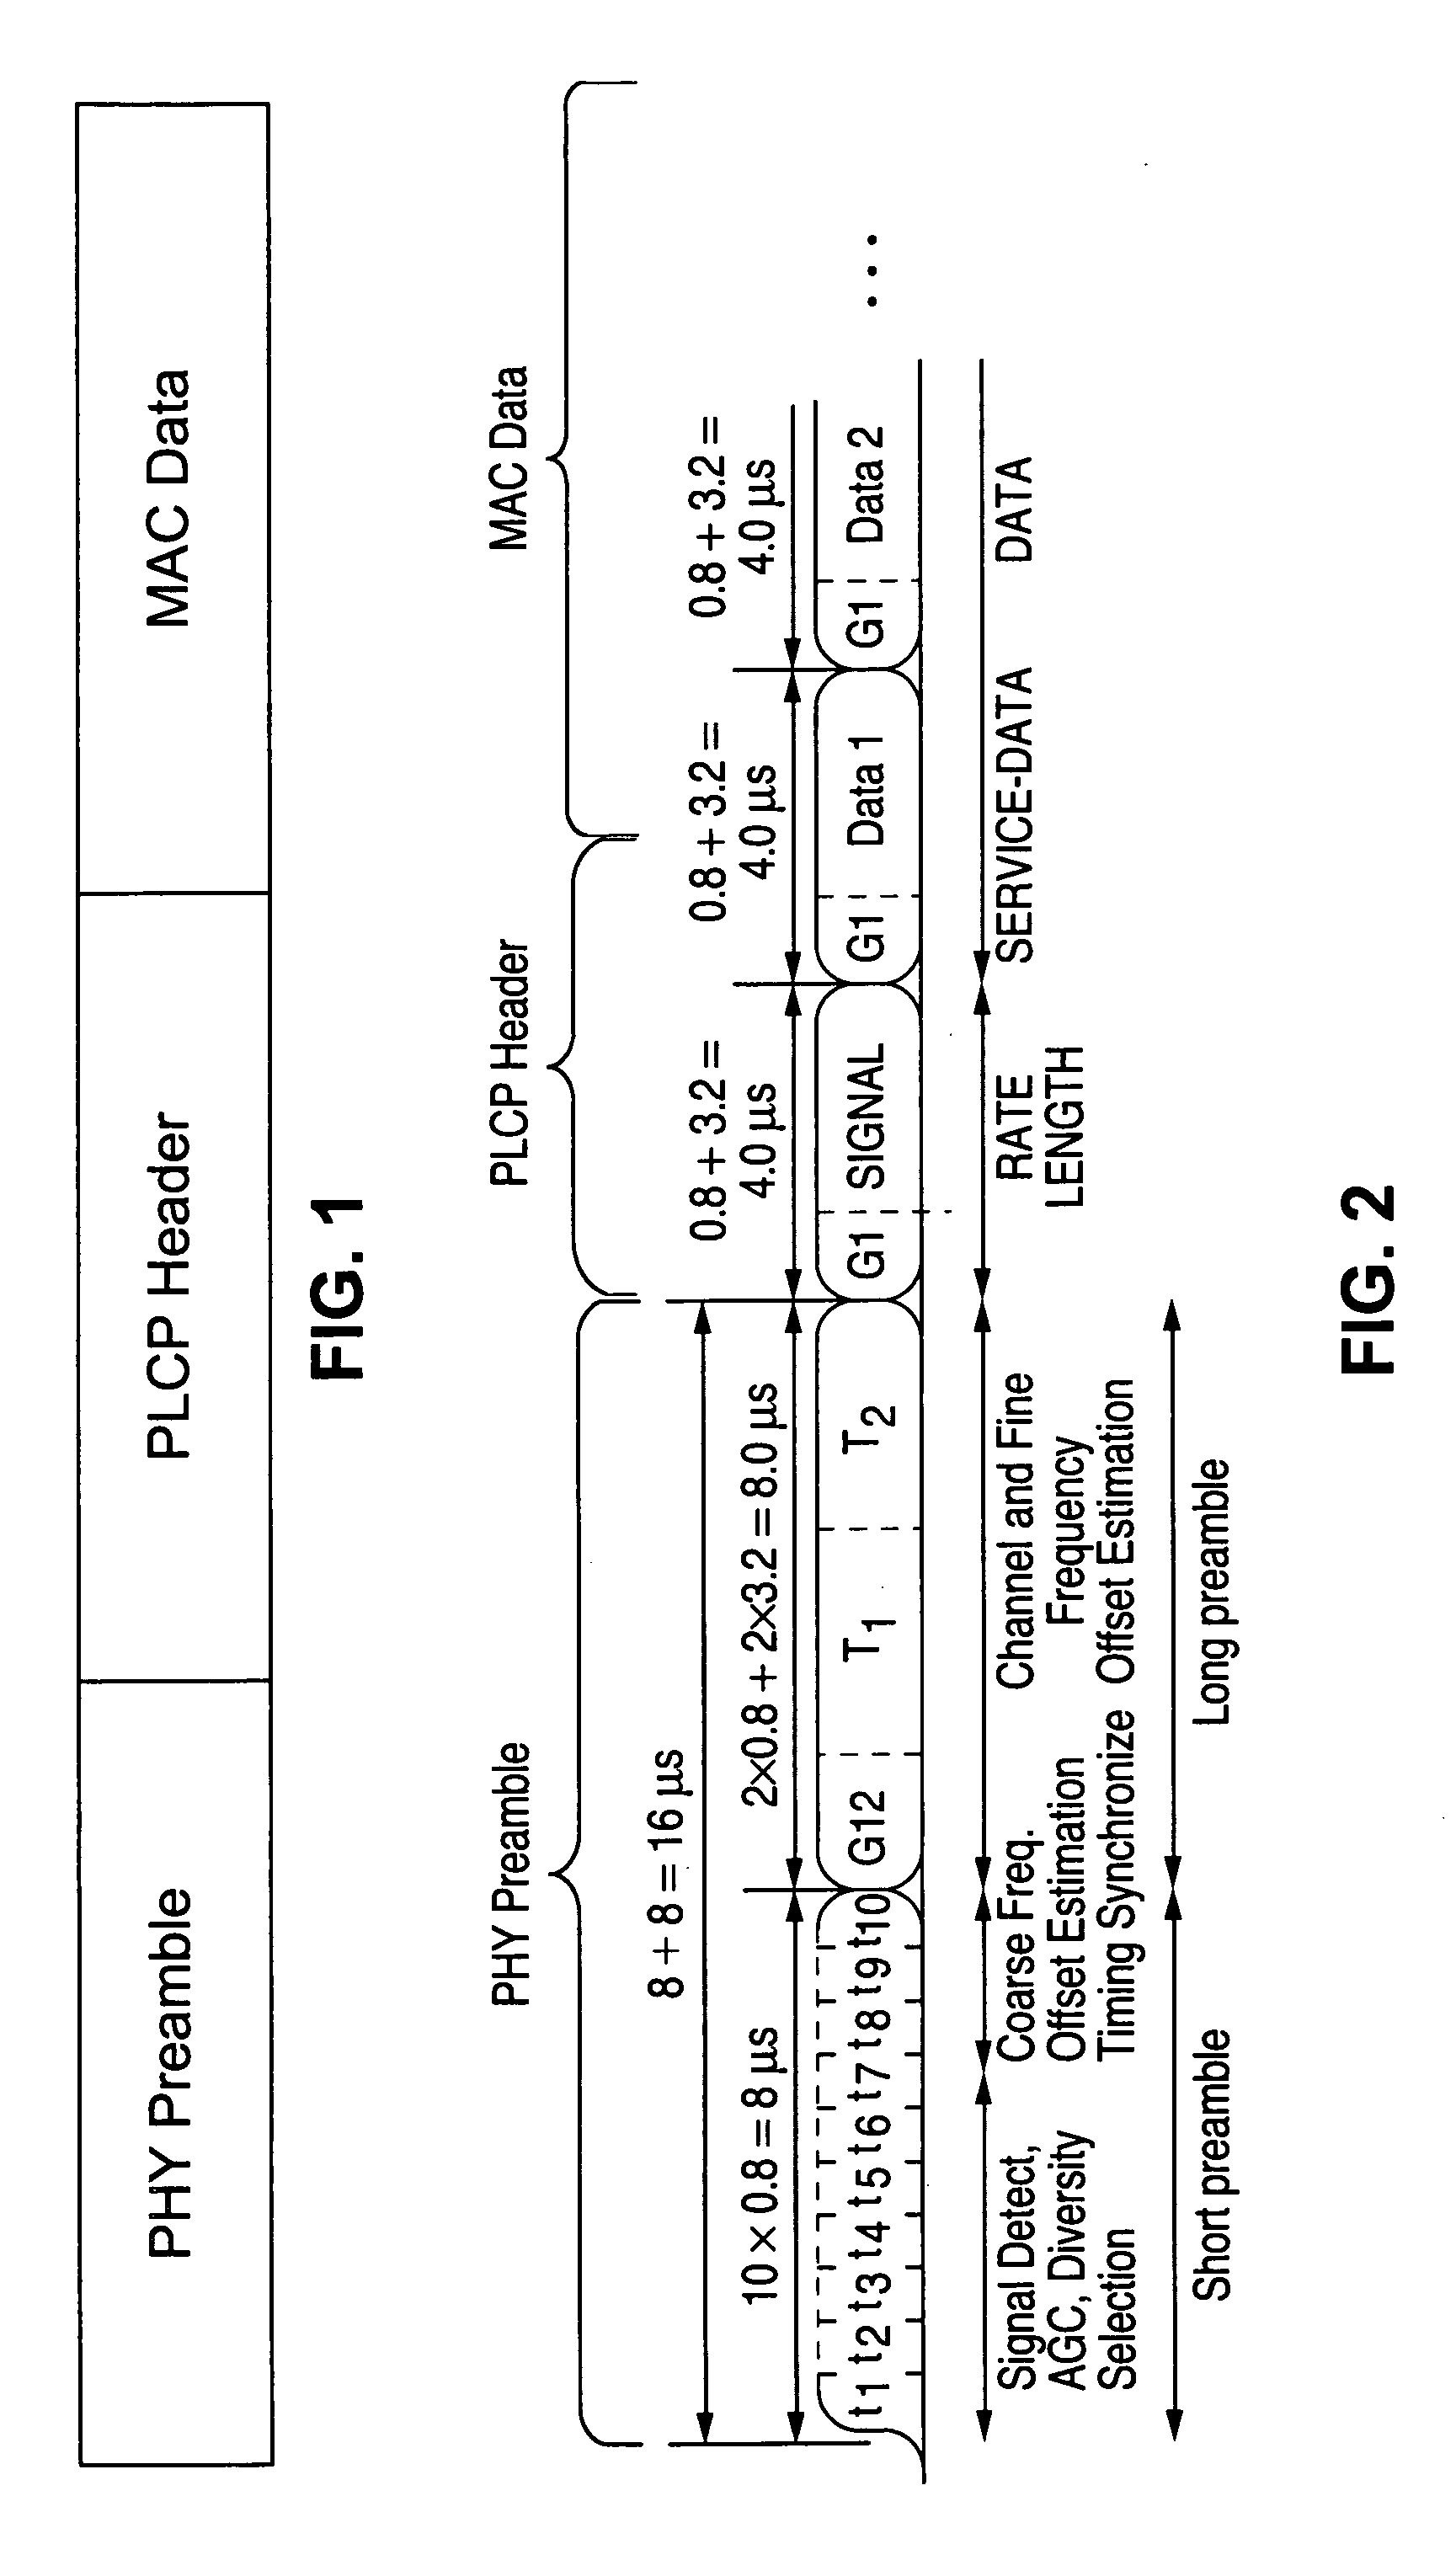 SIMO/MISO transceiver for providing packet data communication with SISO transceiver